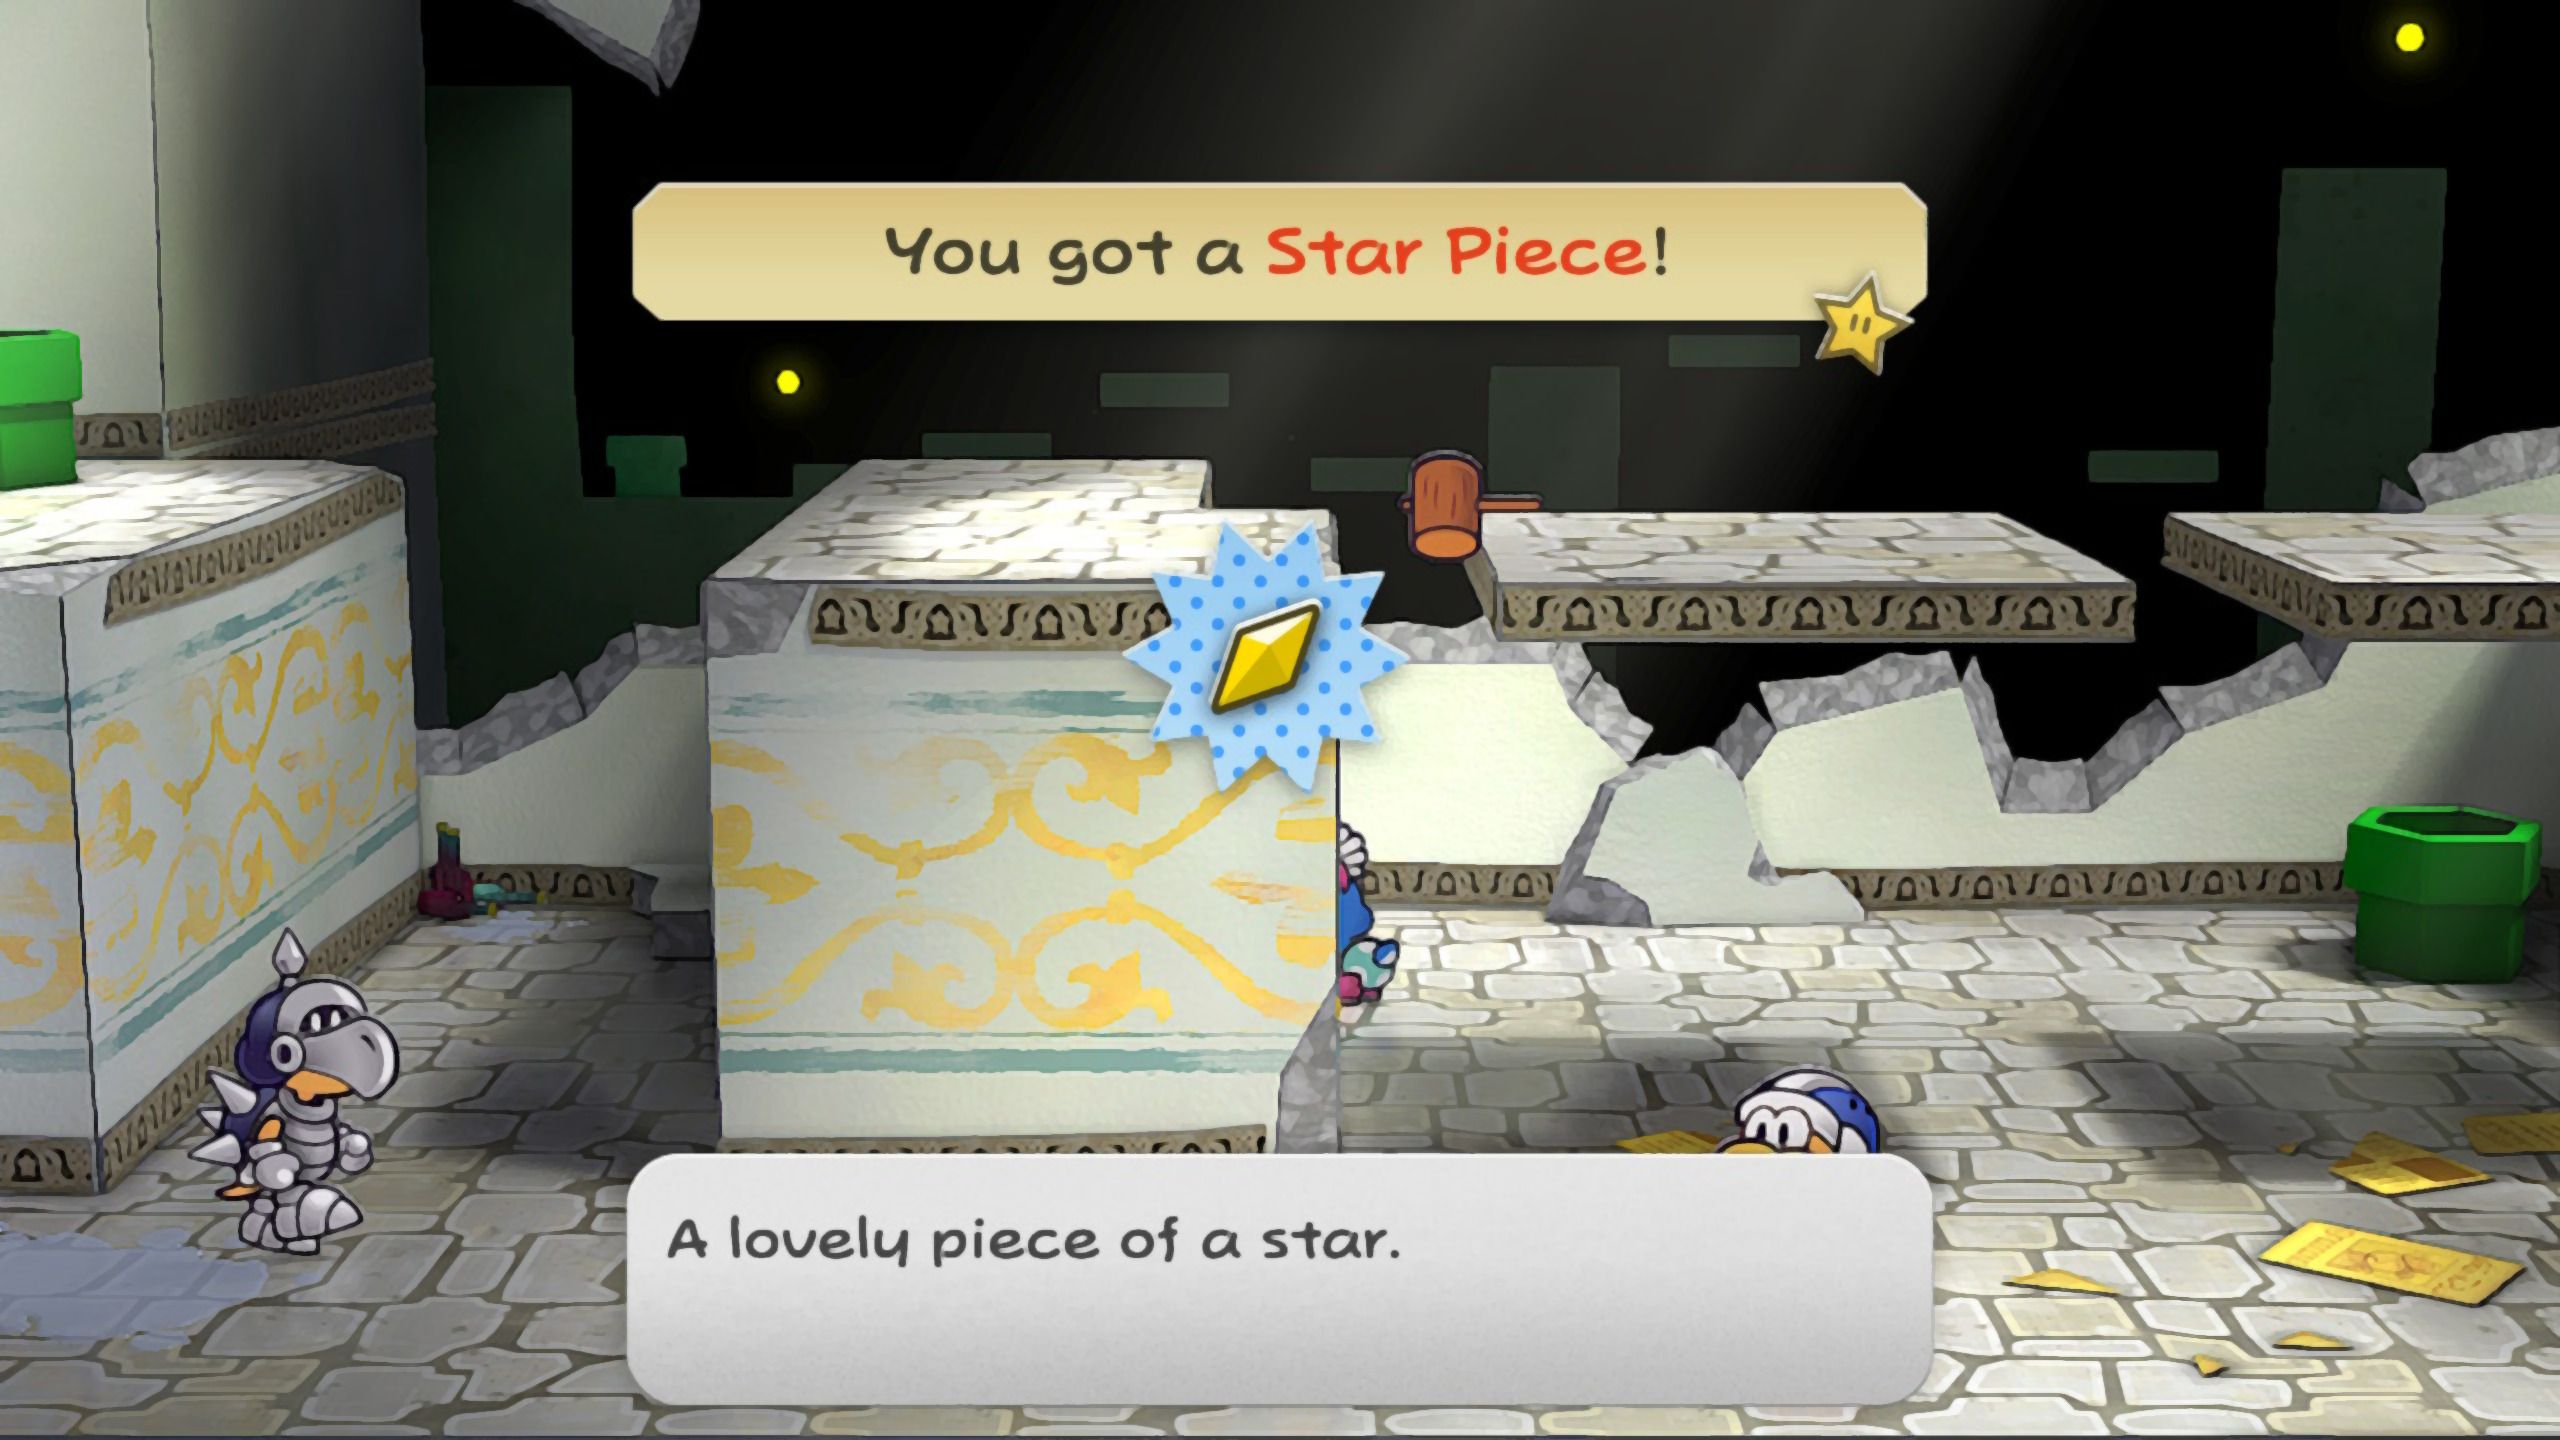 Image of a star piece in the Rogueport Underground in Paper Mario TTYD